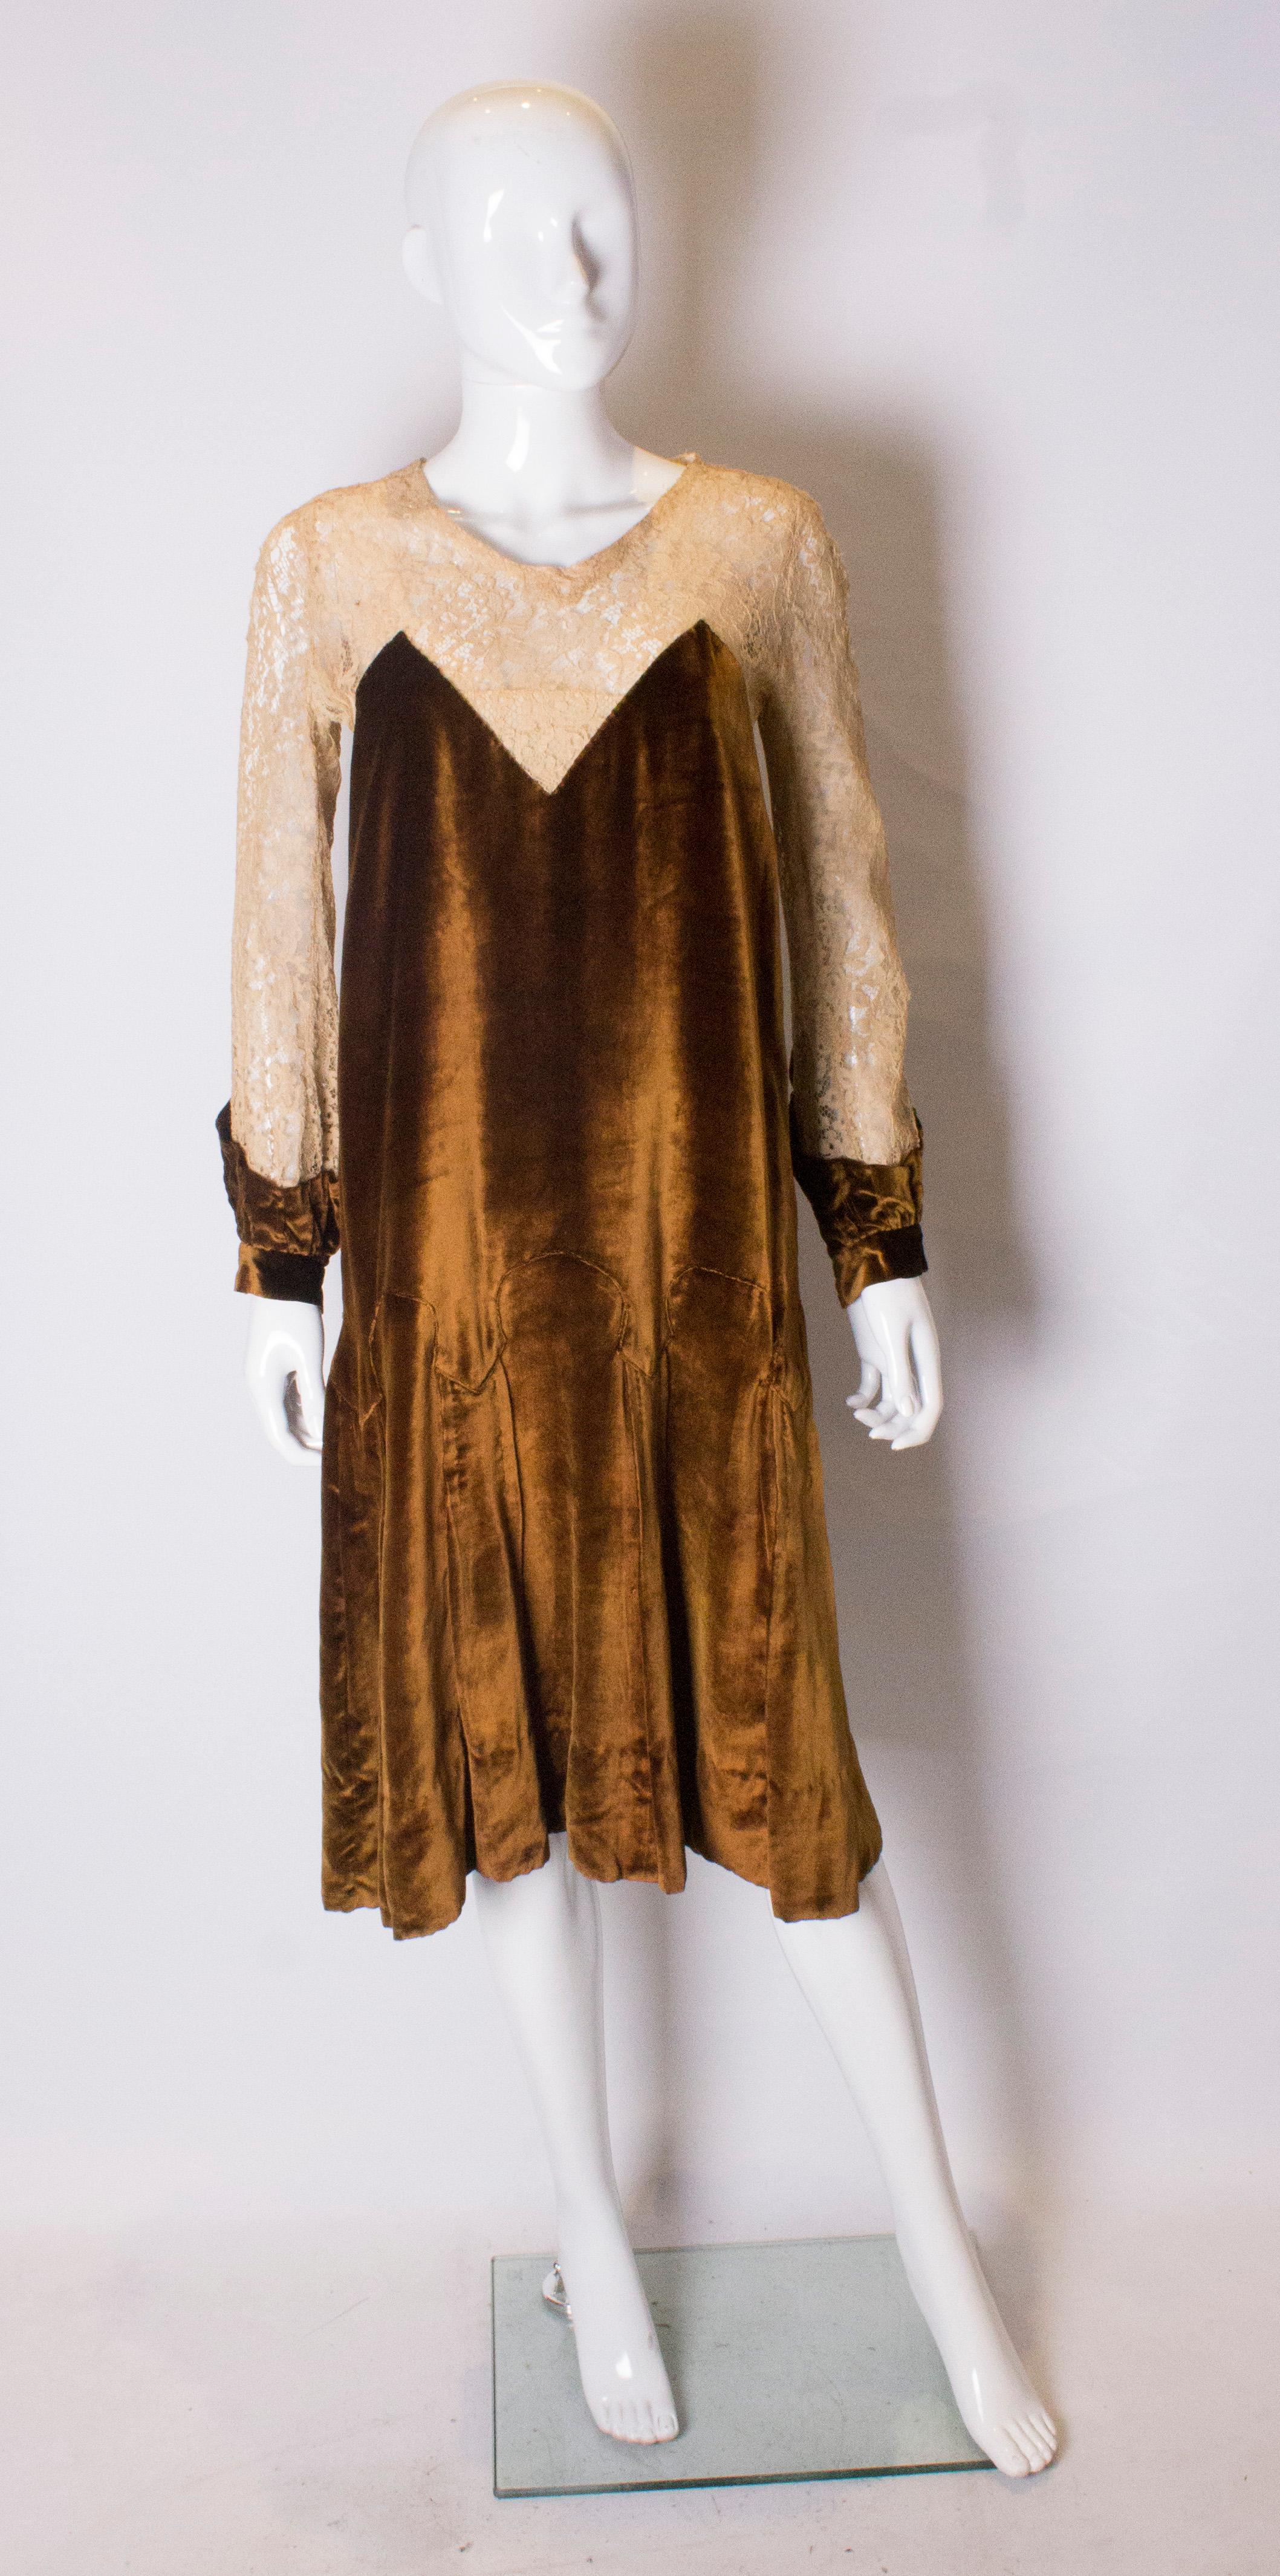 A pretty dress from the 1920s in a  rust /gold colour silk velvet and biscuit colour lace.  The dress has a button opening at the back and is lined to hip leval. The sleeves and yoke are lace and the dress has as drop waist.